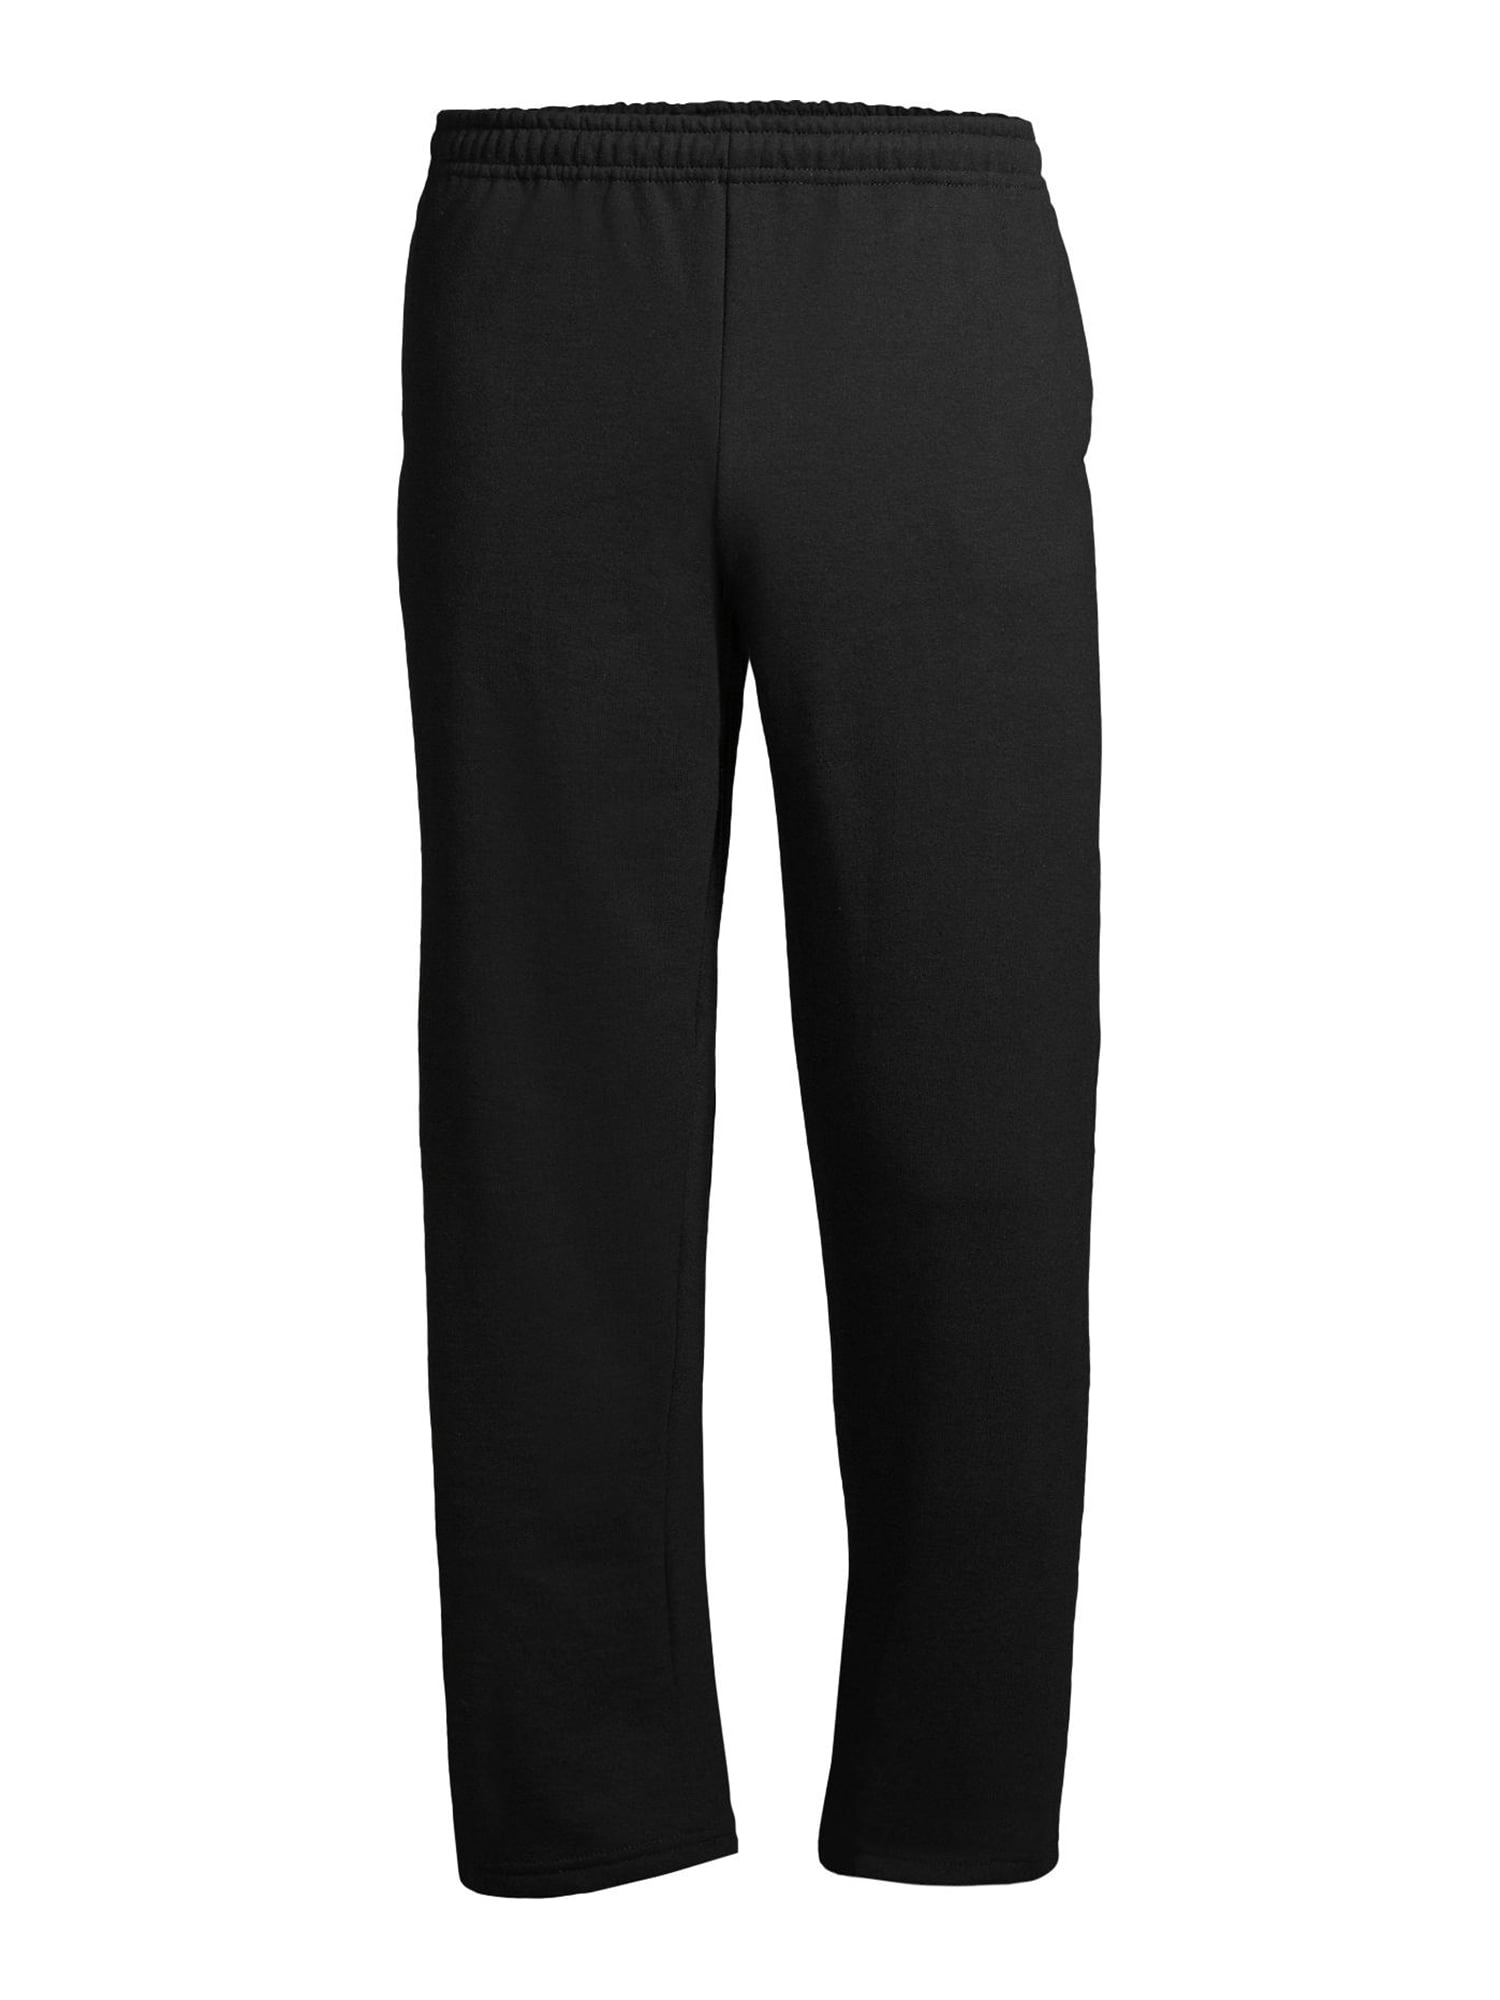 Gildan Adult Fleece Open Bottom Sweatpants with Pockets, Style G18300,  Black, Small at  Men's Clothing store